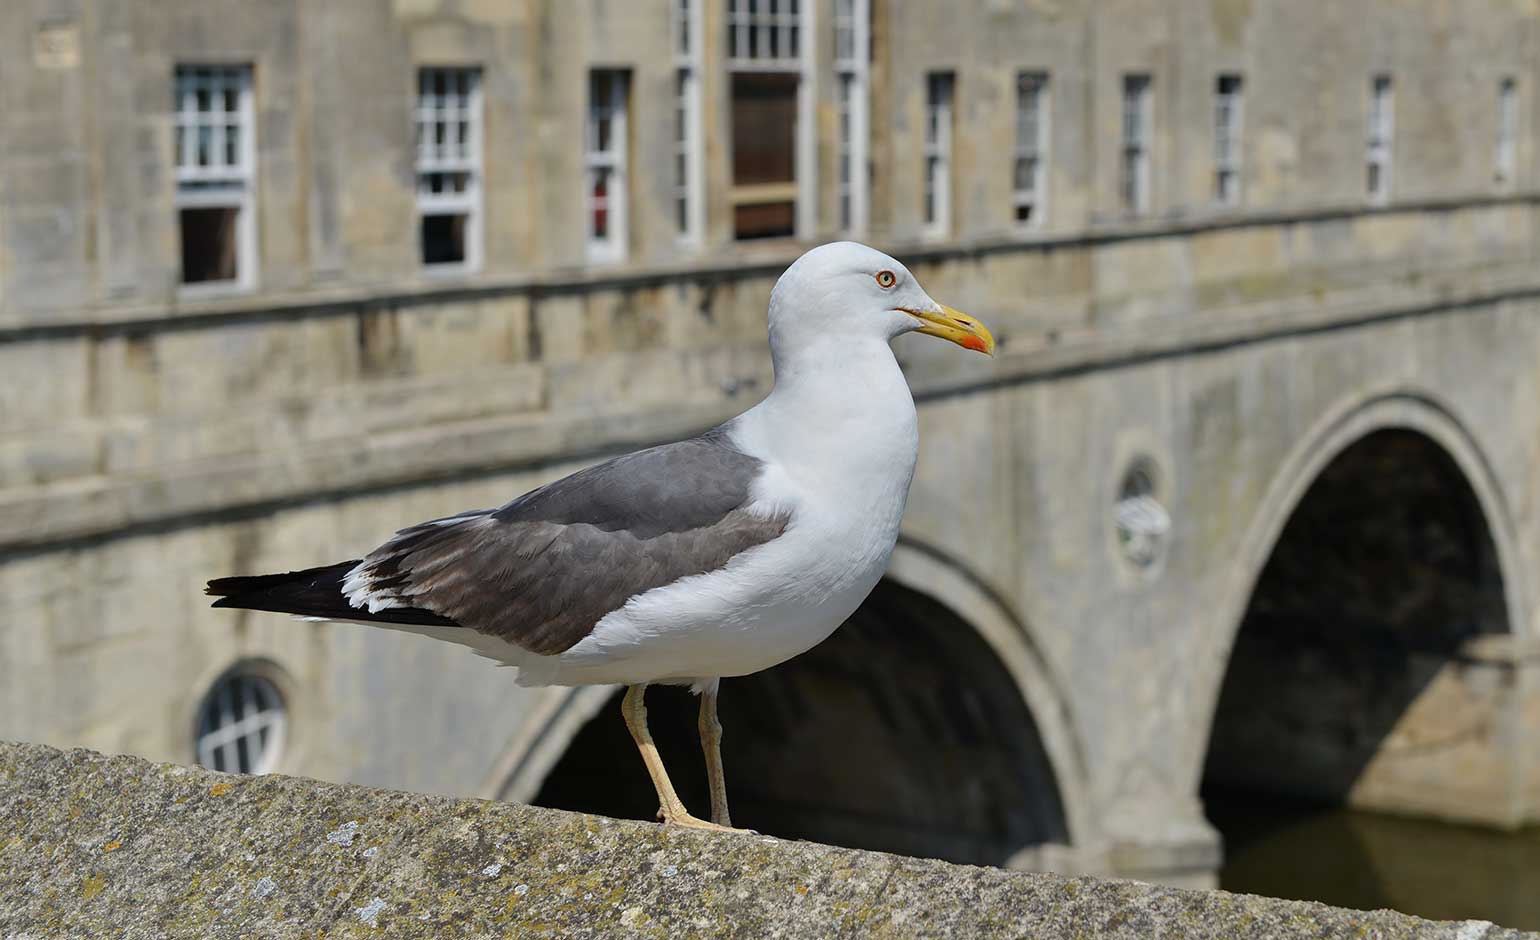 Residents and businesses urged to report ongoing issues with gulls